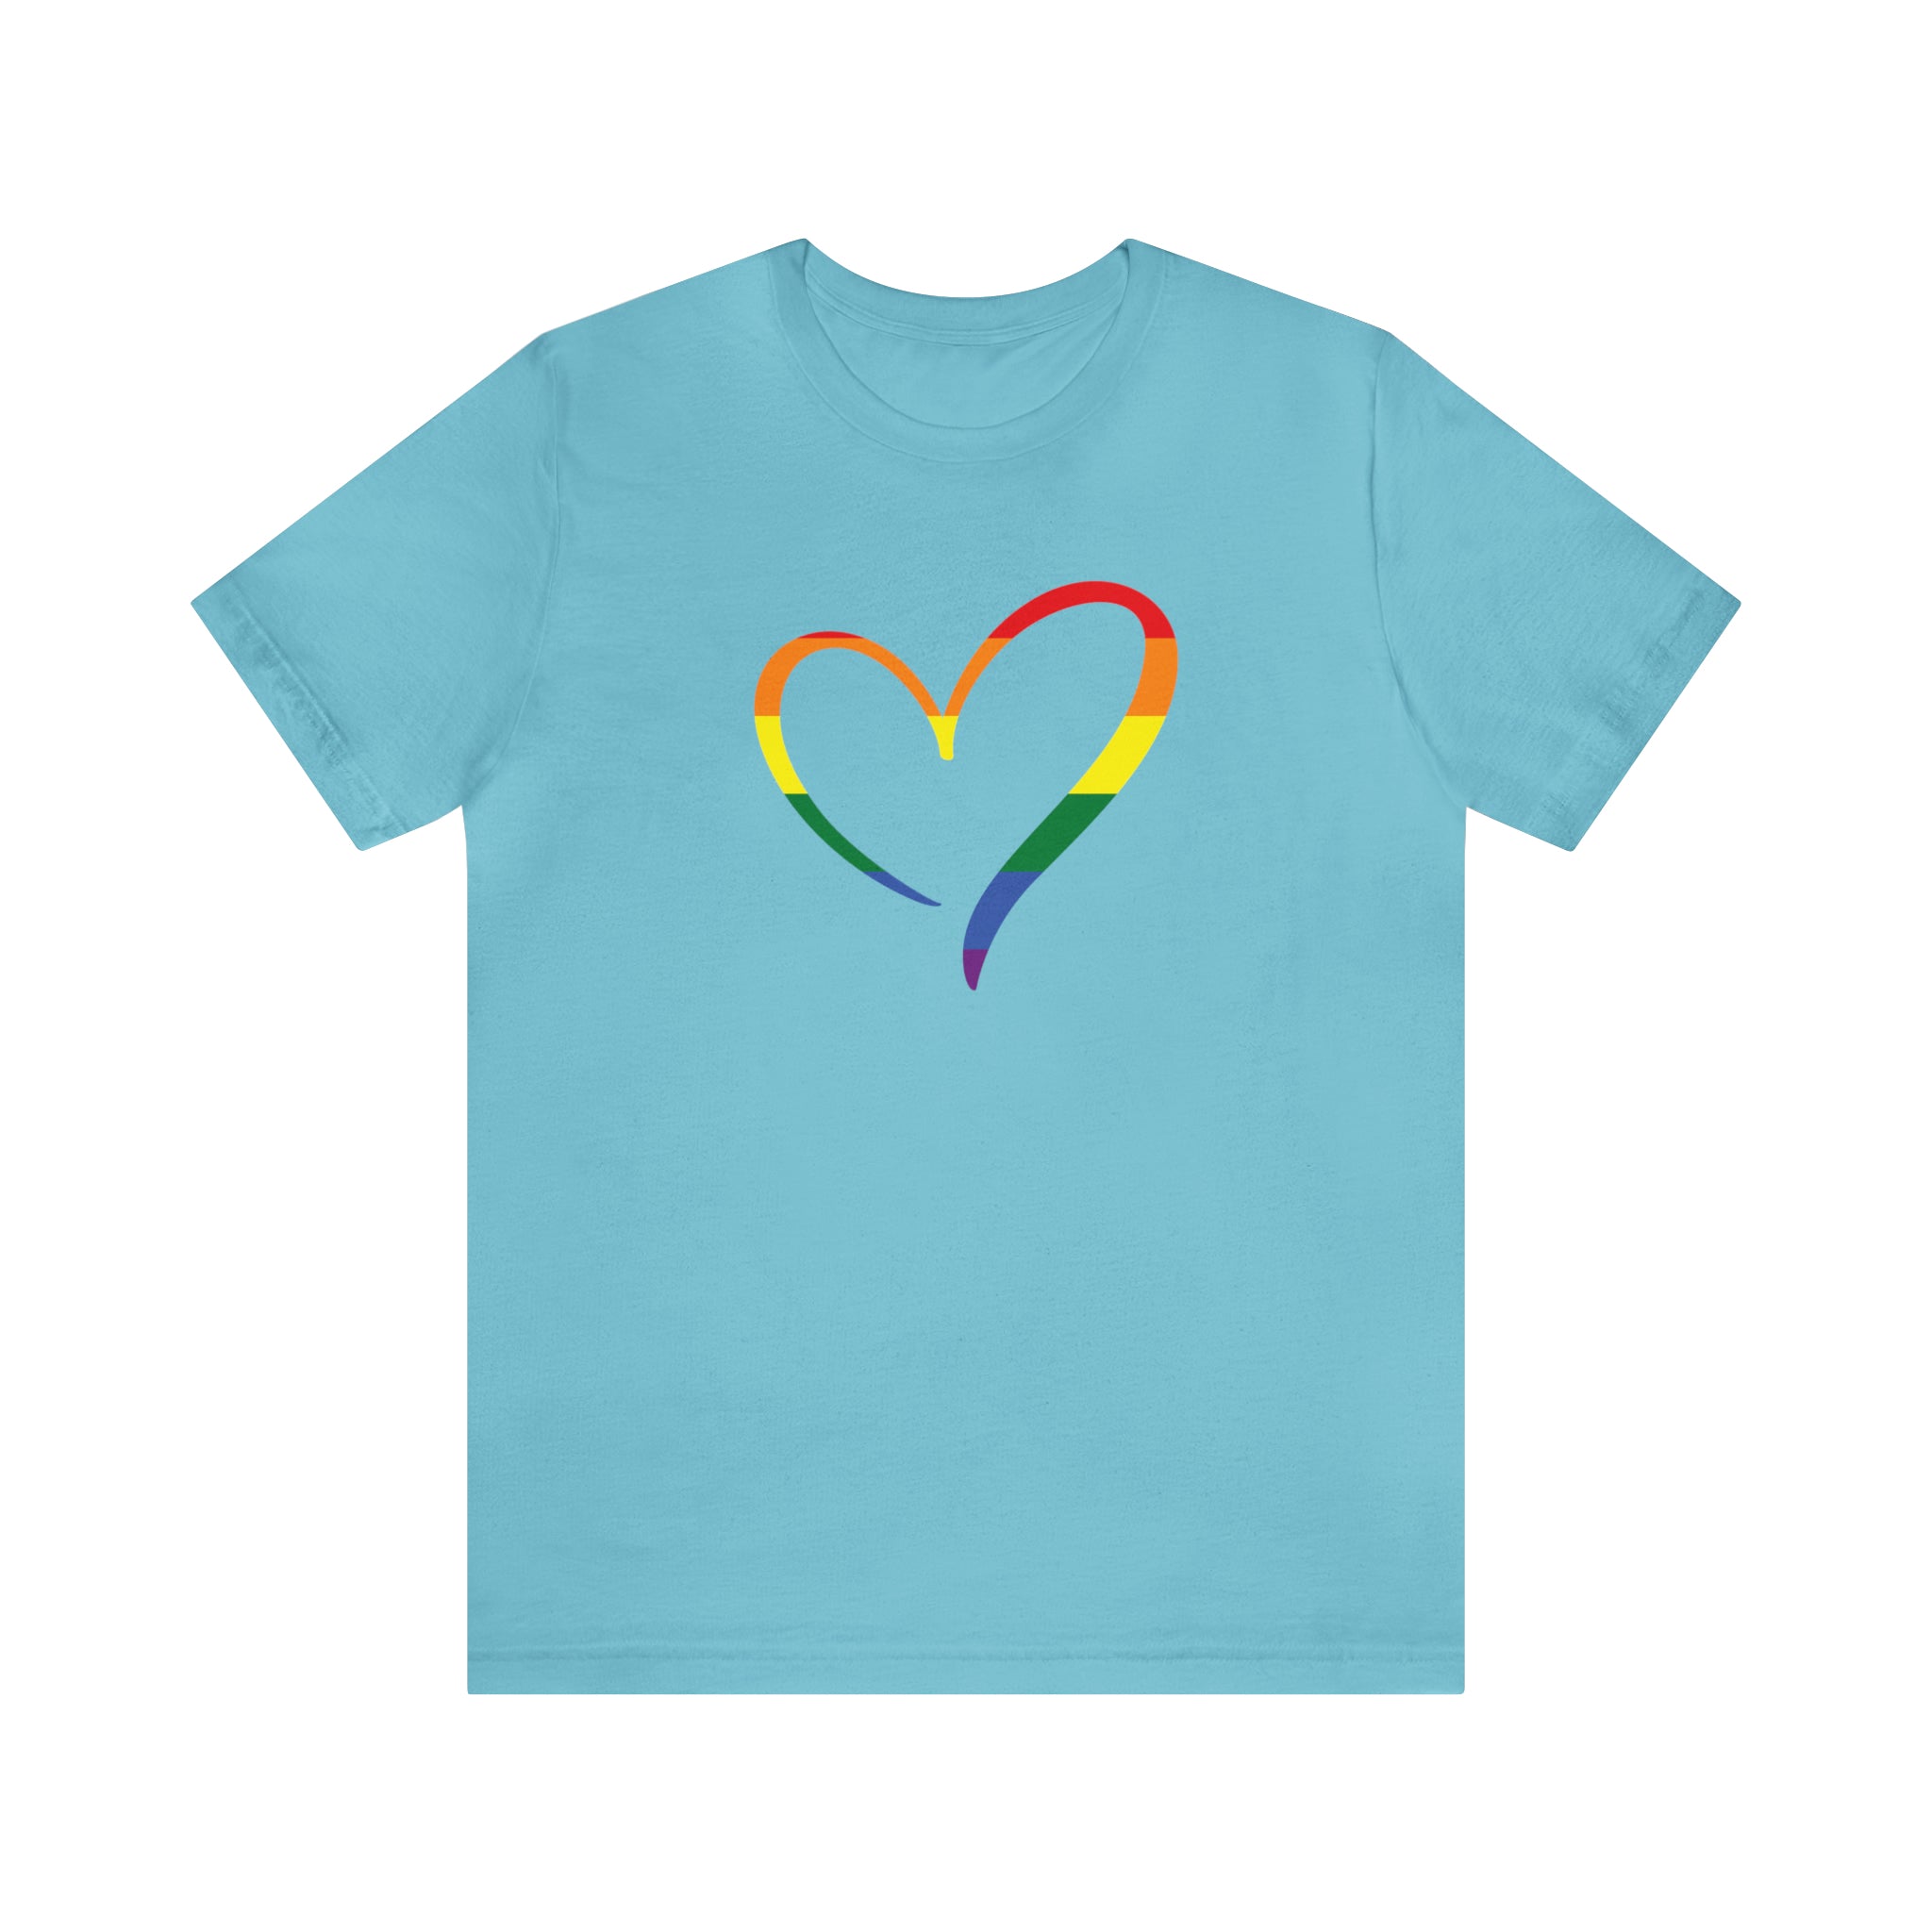 Pride Heart T-Shirt by Wholesome Memes : Unisex 100% Comfy Cotton T-Shirt by Bella+Canvas